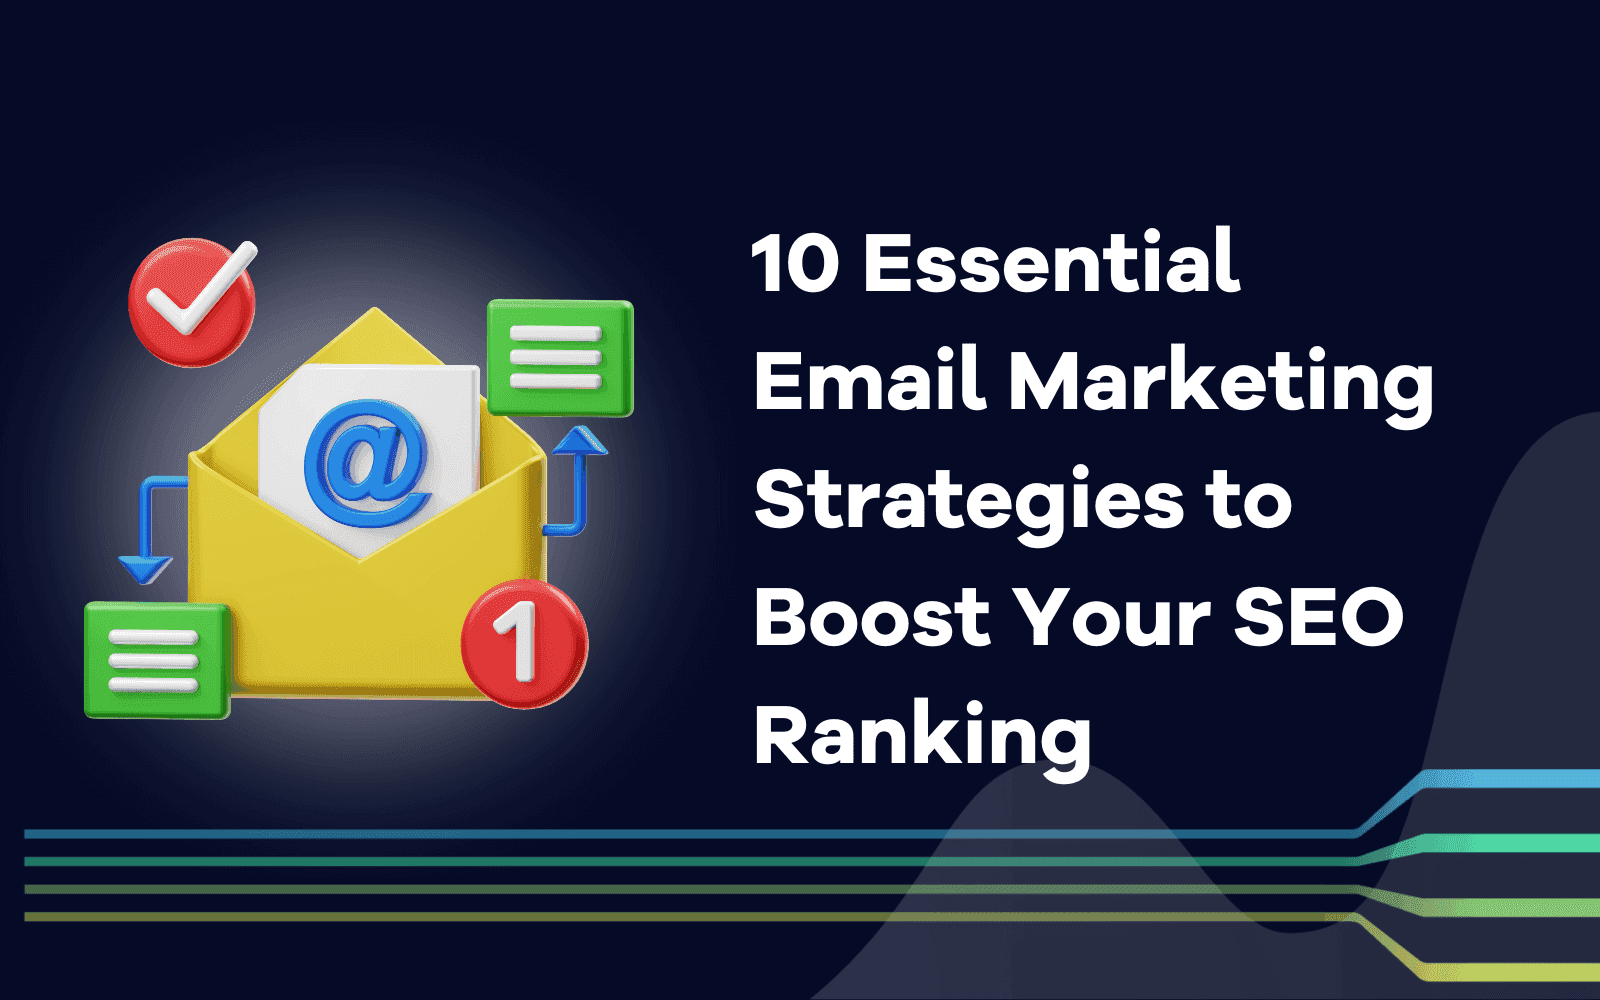 Email Marketing Strategies to Boost Your SEO Ranking